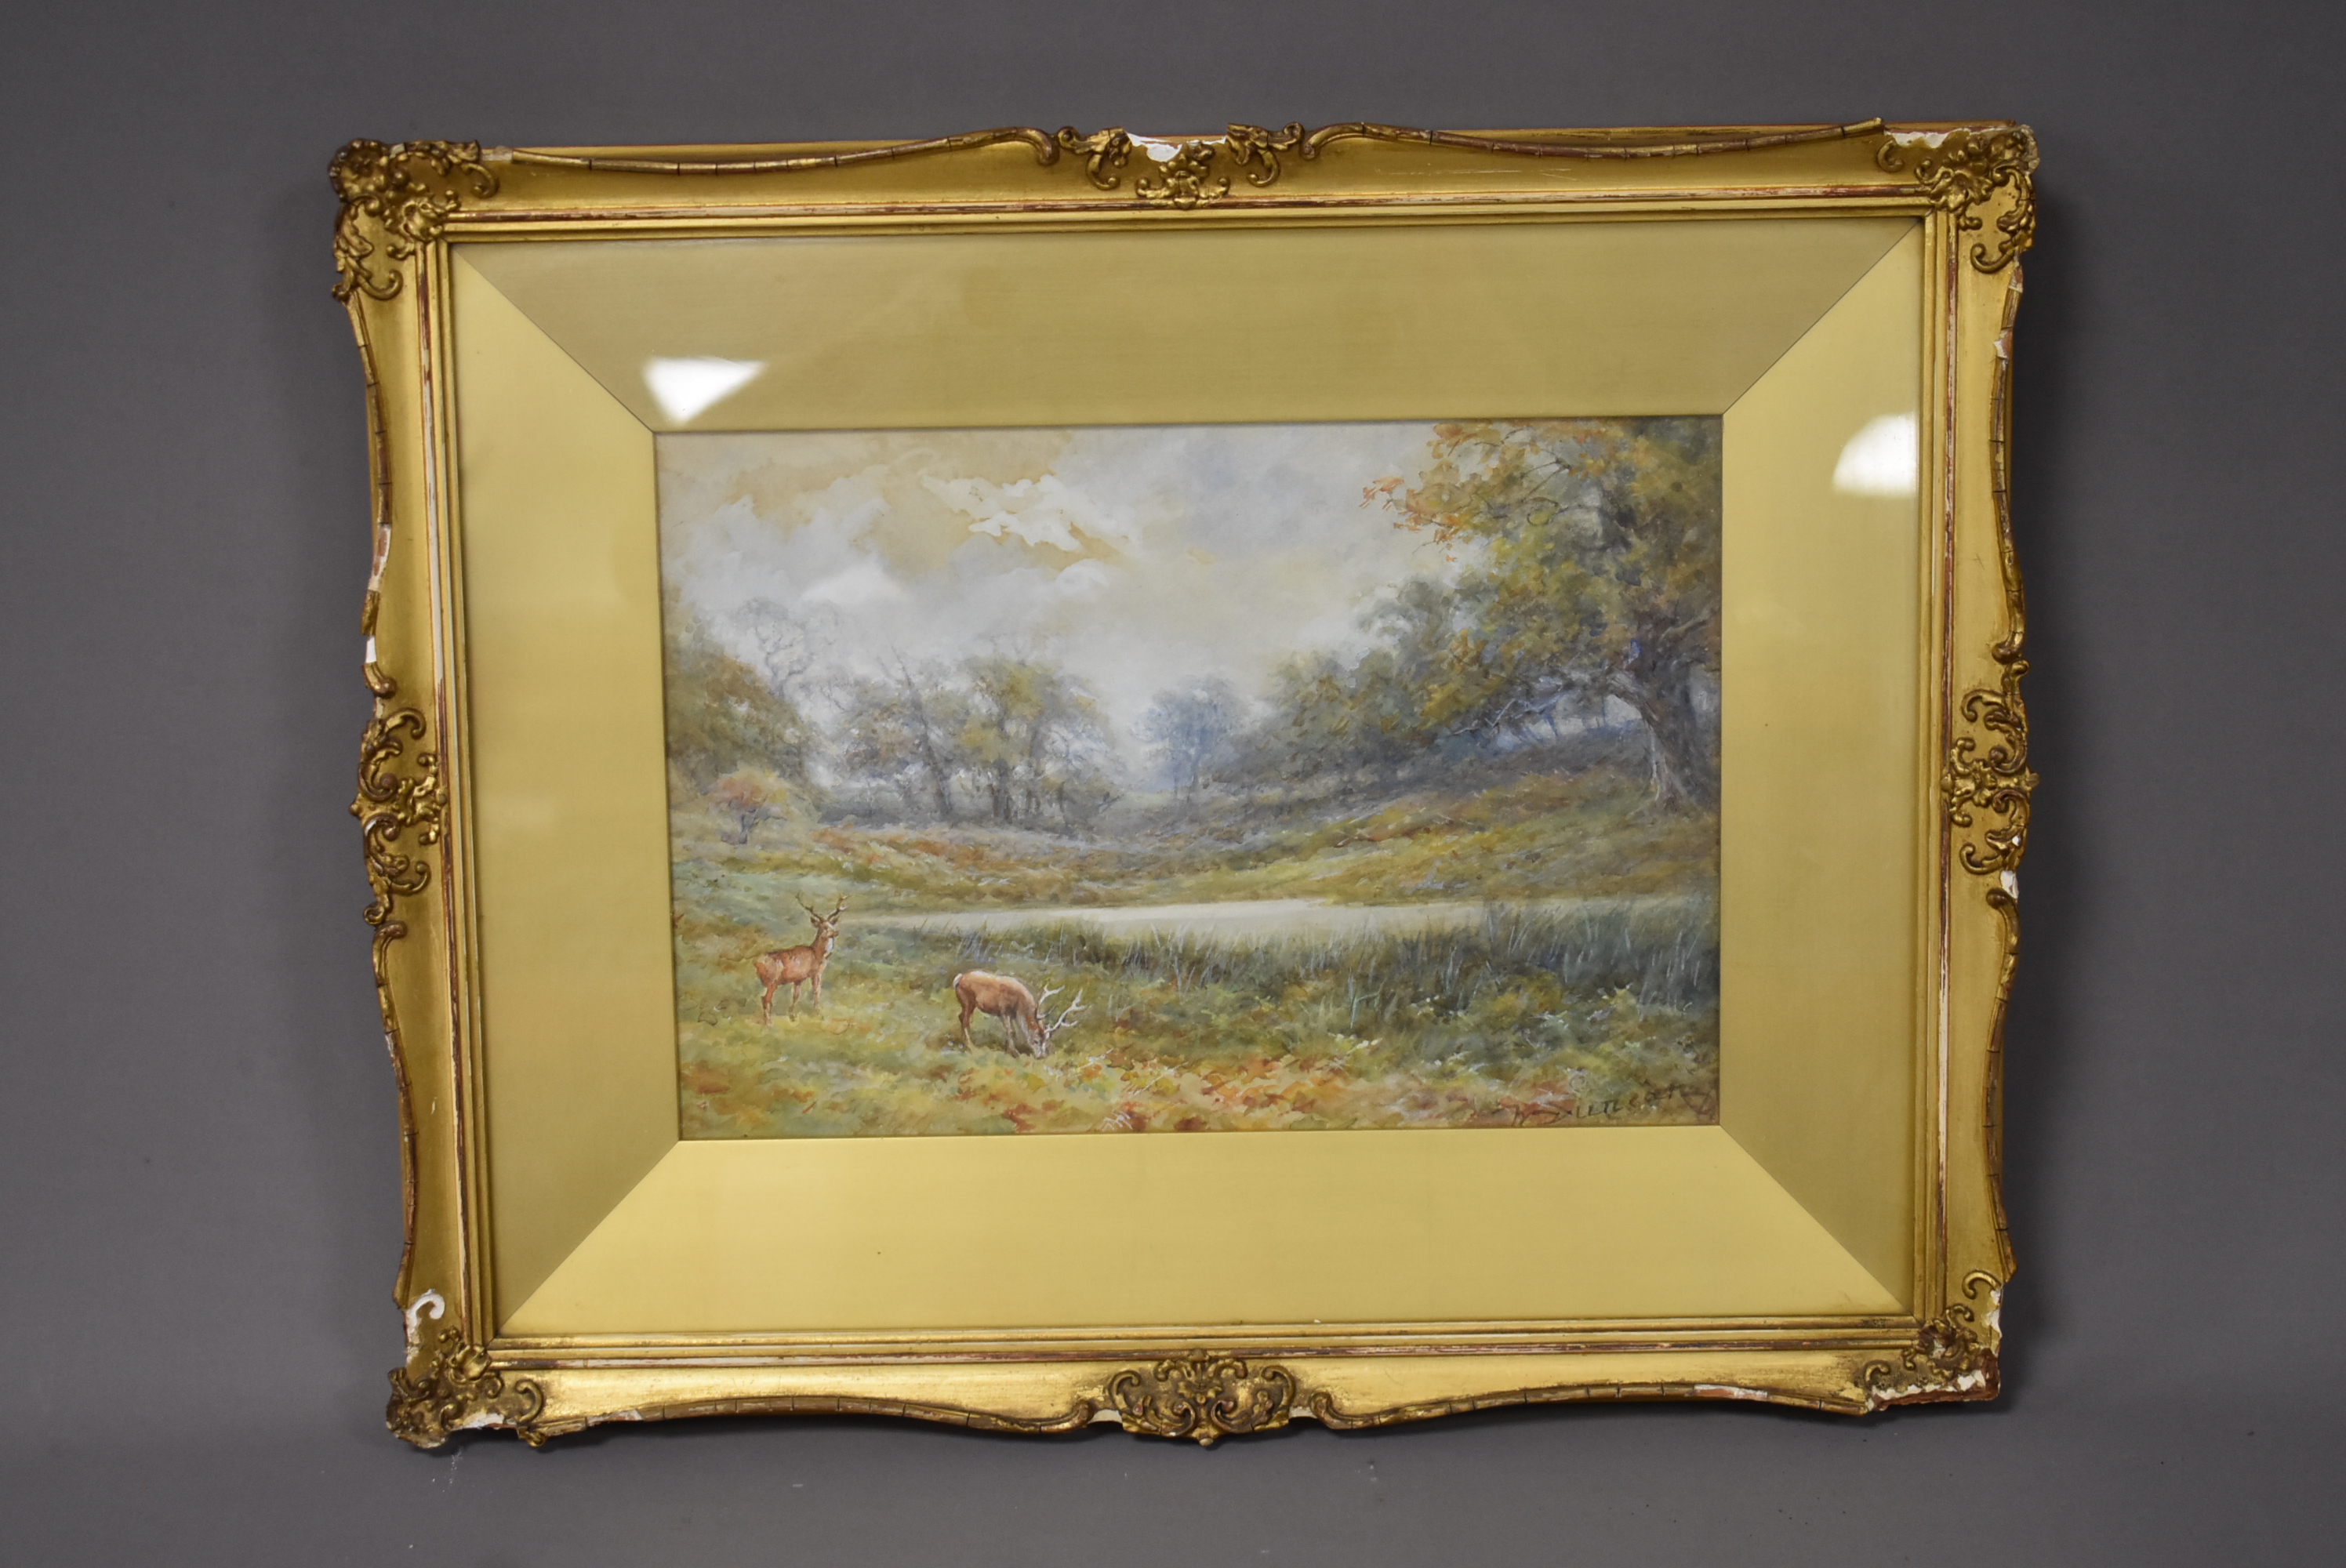 19th century (British School), 19cm by 28cm, watercolour, Stags near a wooded pond, signed